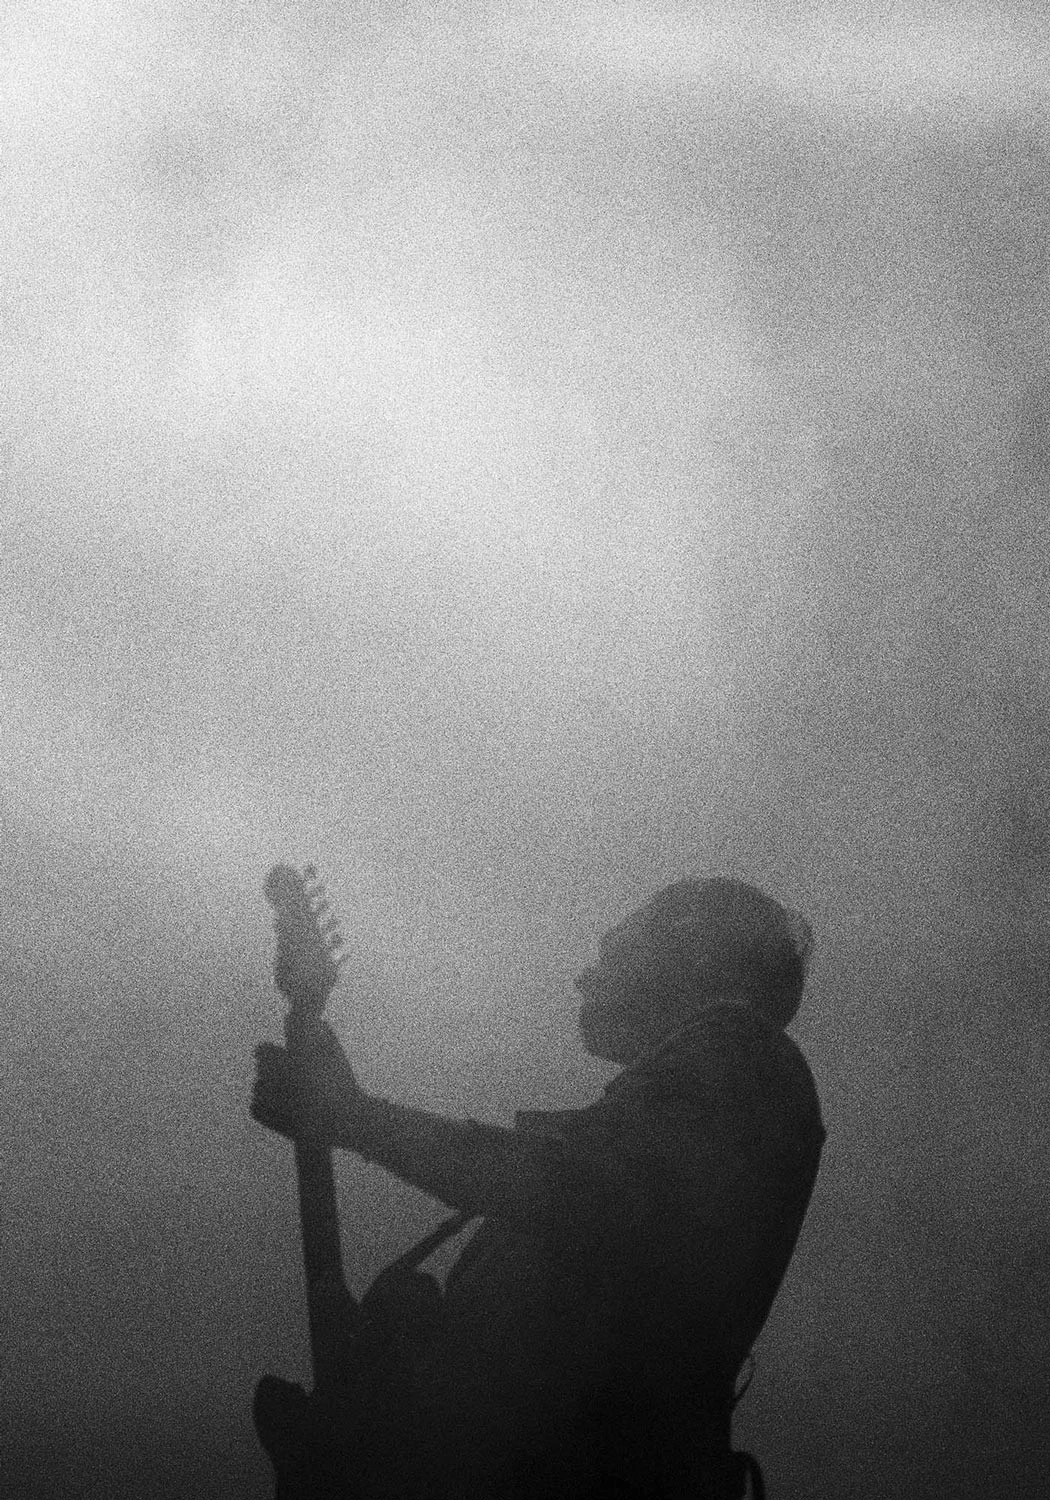 Guitarist playing music inside the fog